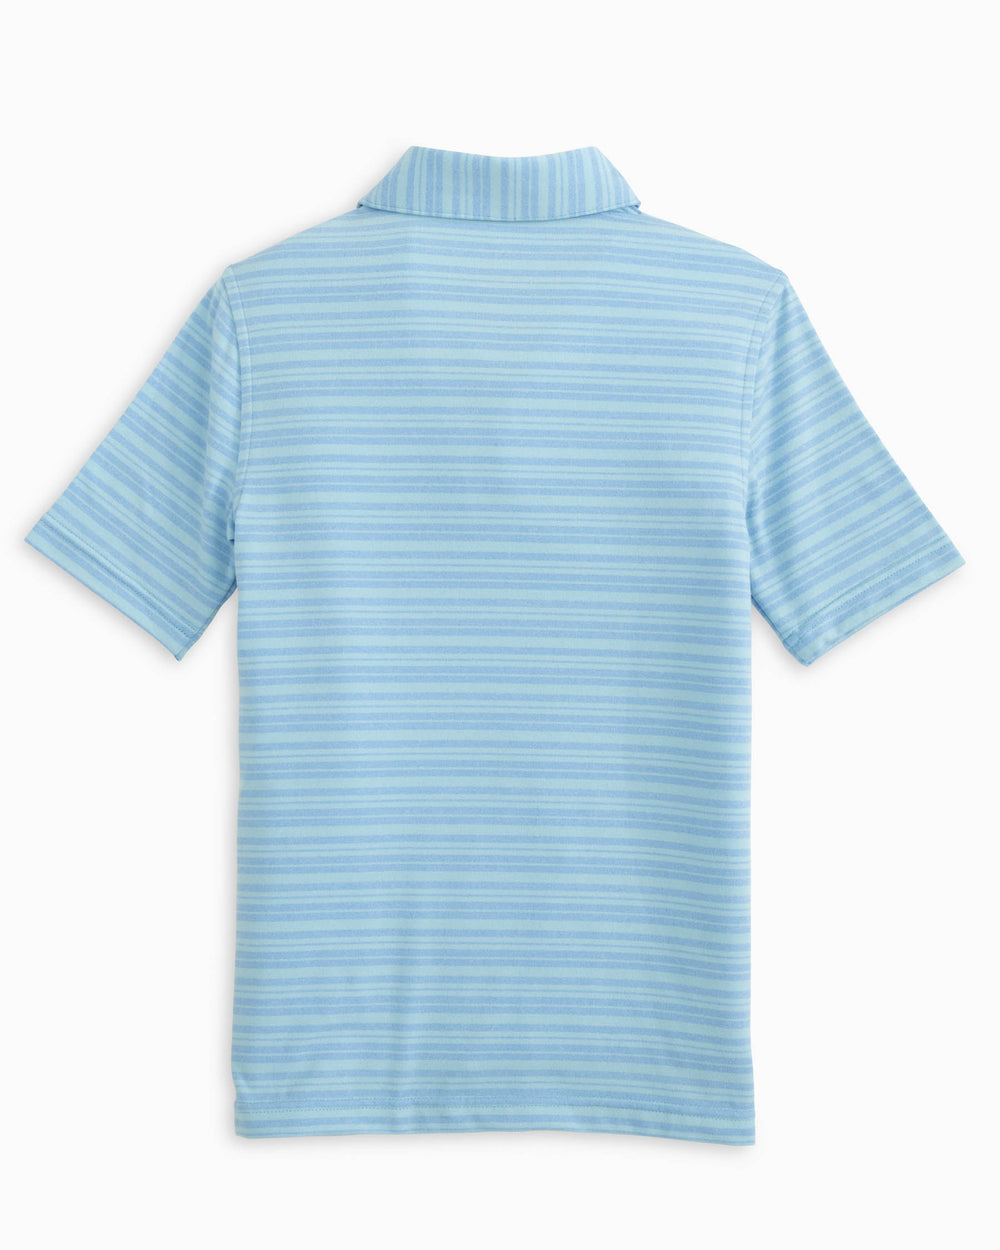 The back view of the Southern Tide Youth Ryder Heather Bombay Stripe Performance Polo Shirt by Southern Tide - Heather Boat Blue